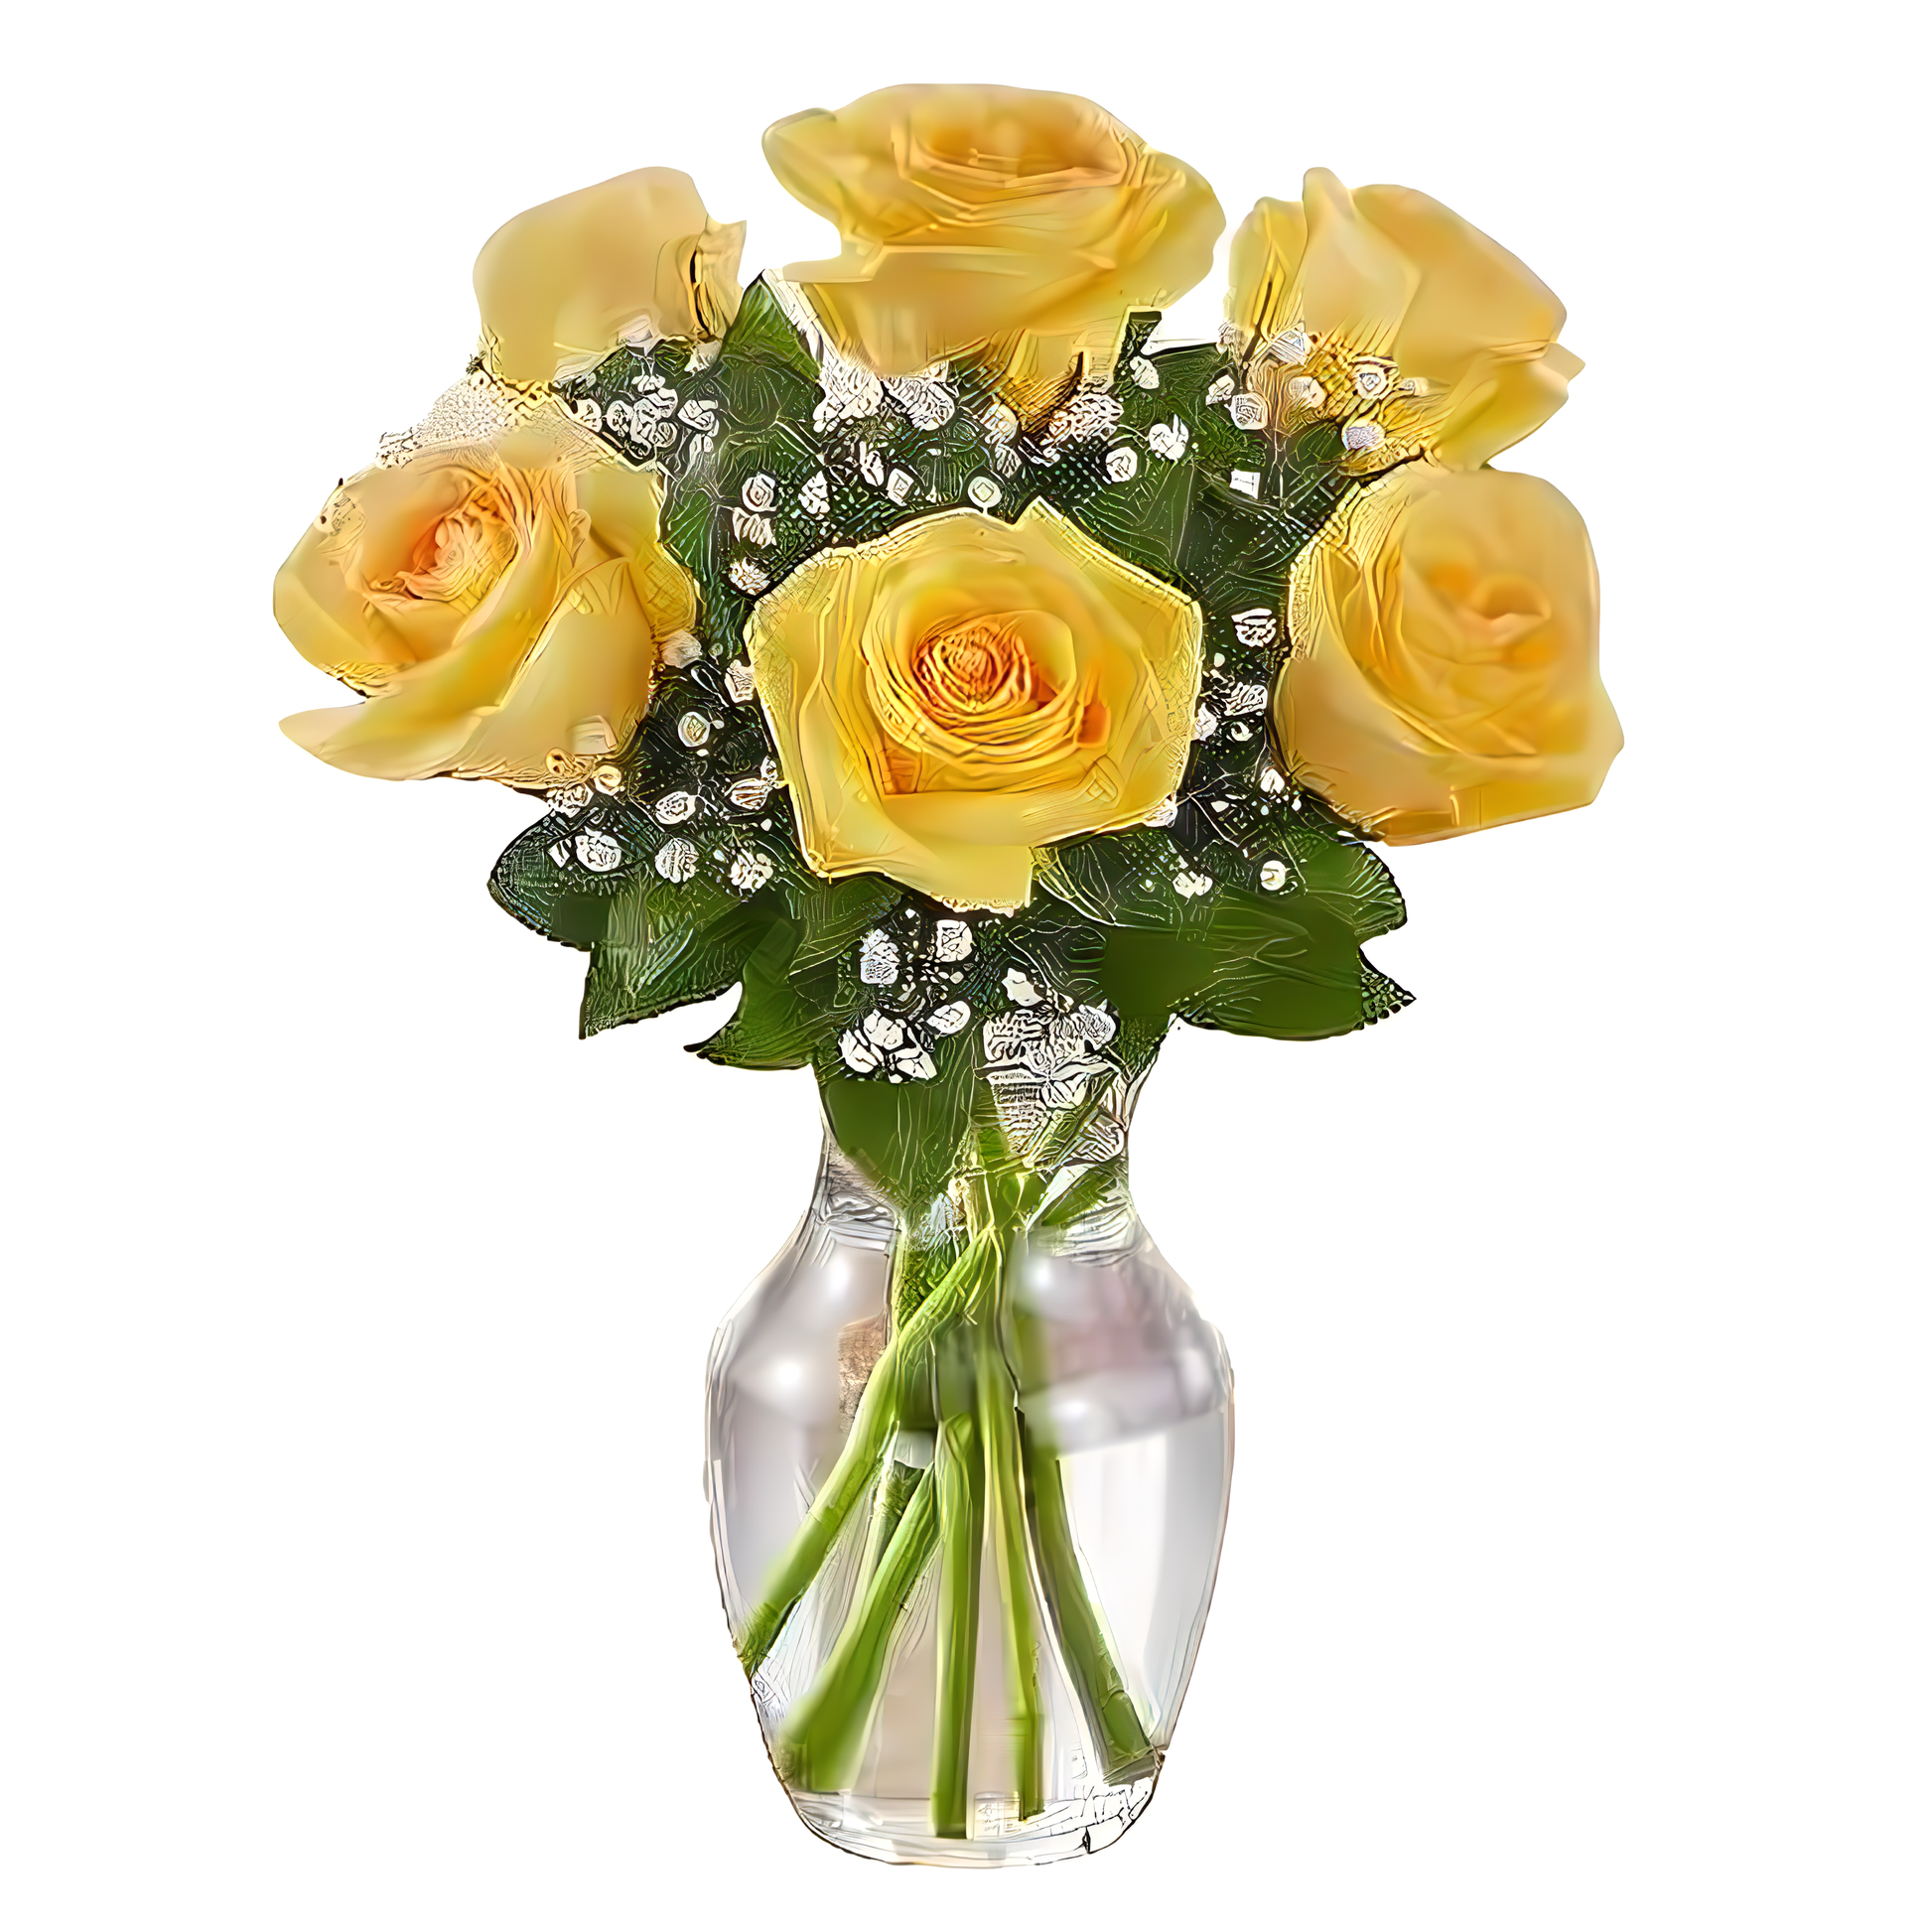 NYC Flower Delivery - Love's Embrace Roses Yellow - Roses